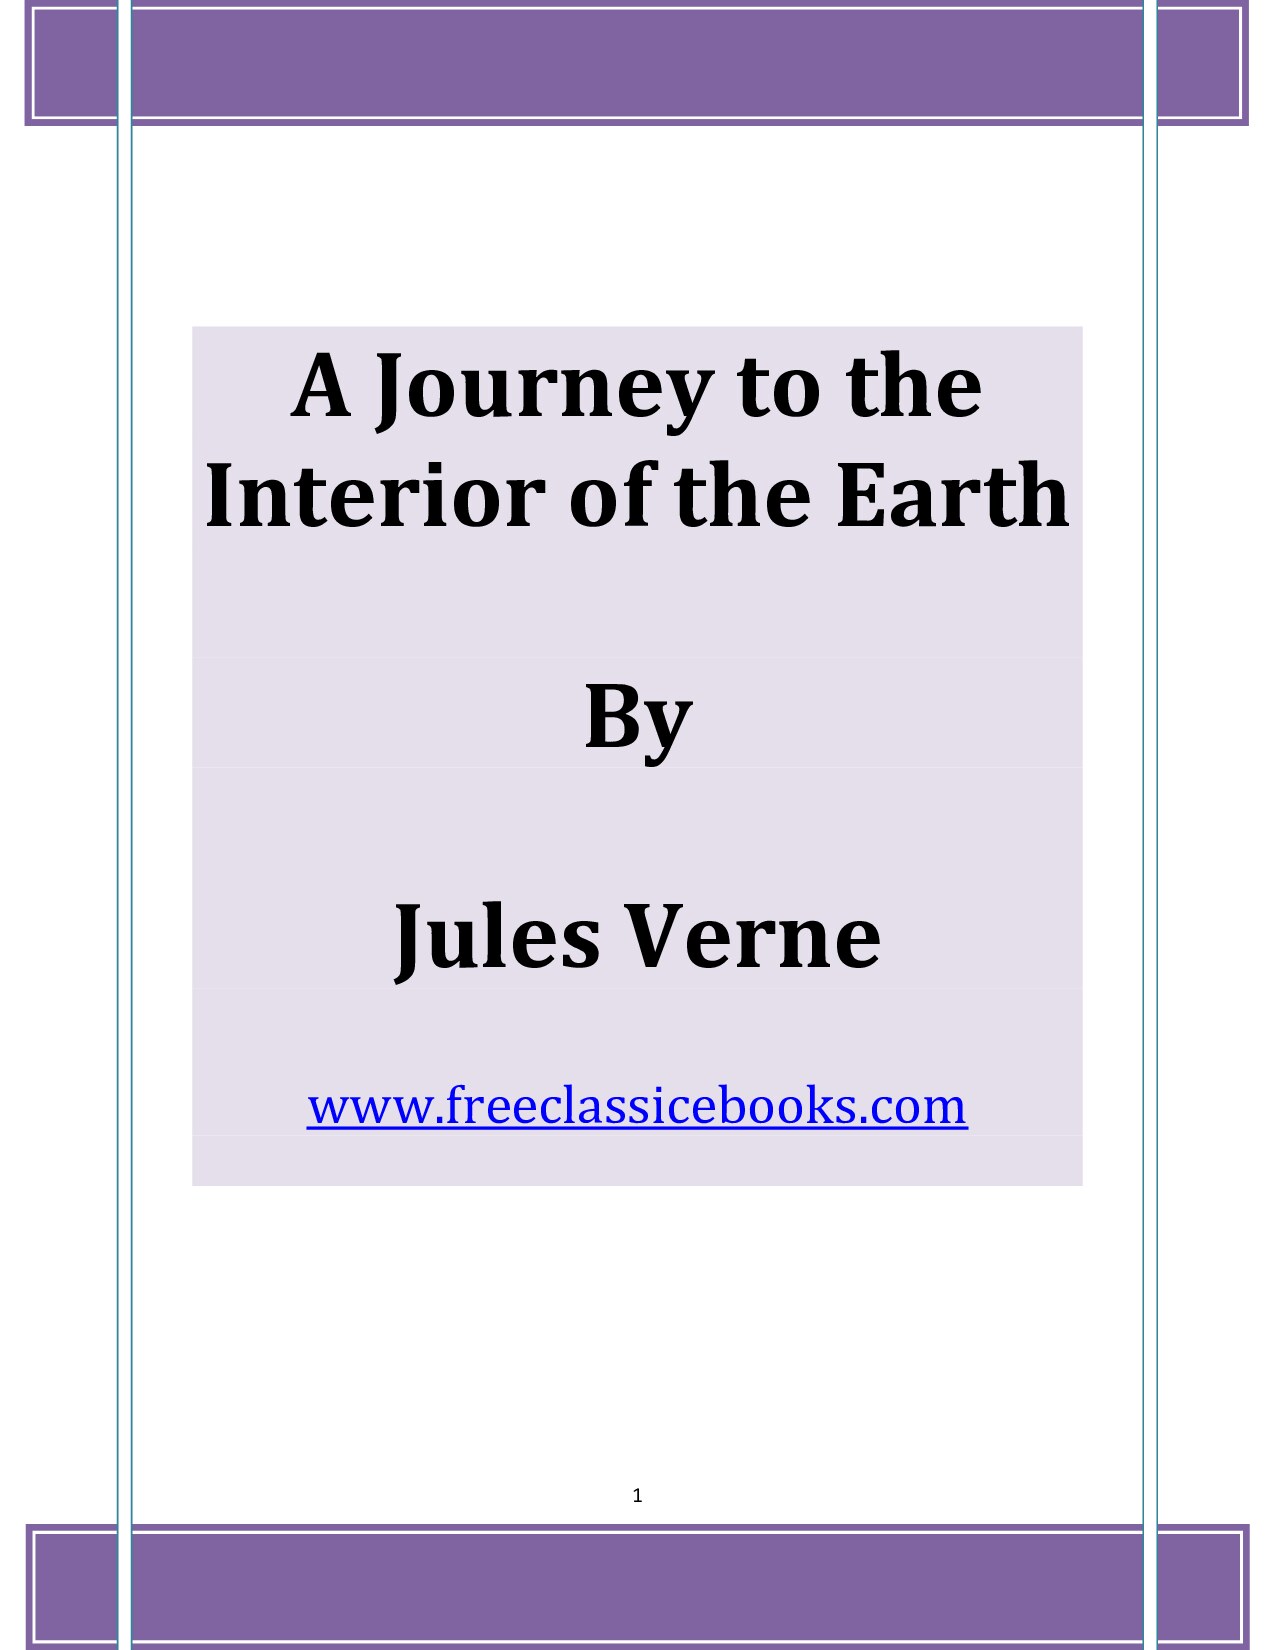 Microsoft Word - A Journey to the Interior of the Earth.doc